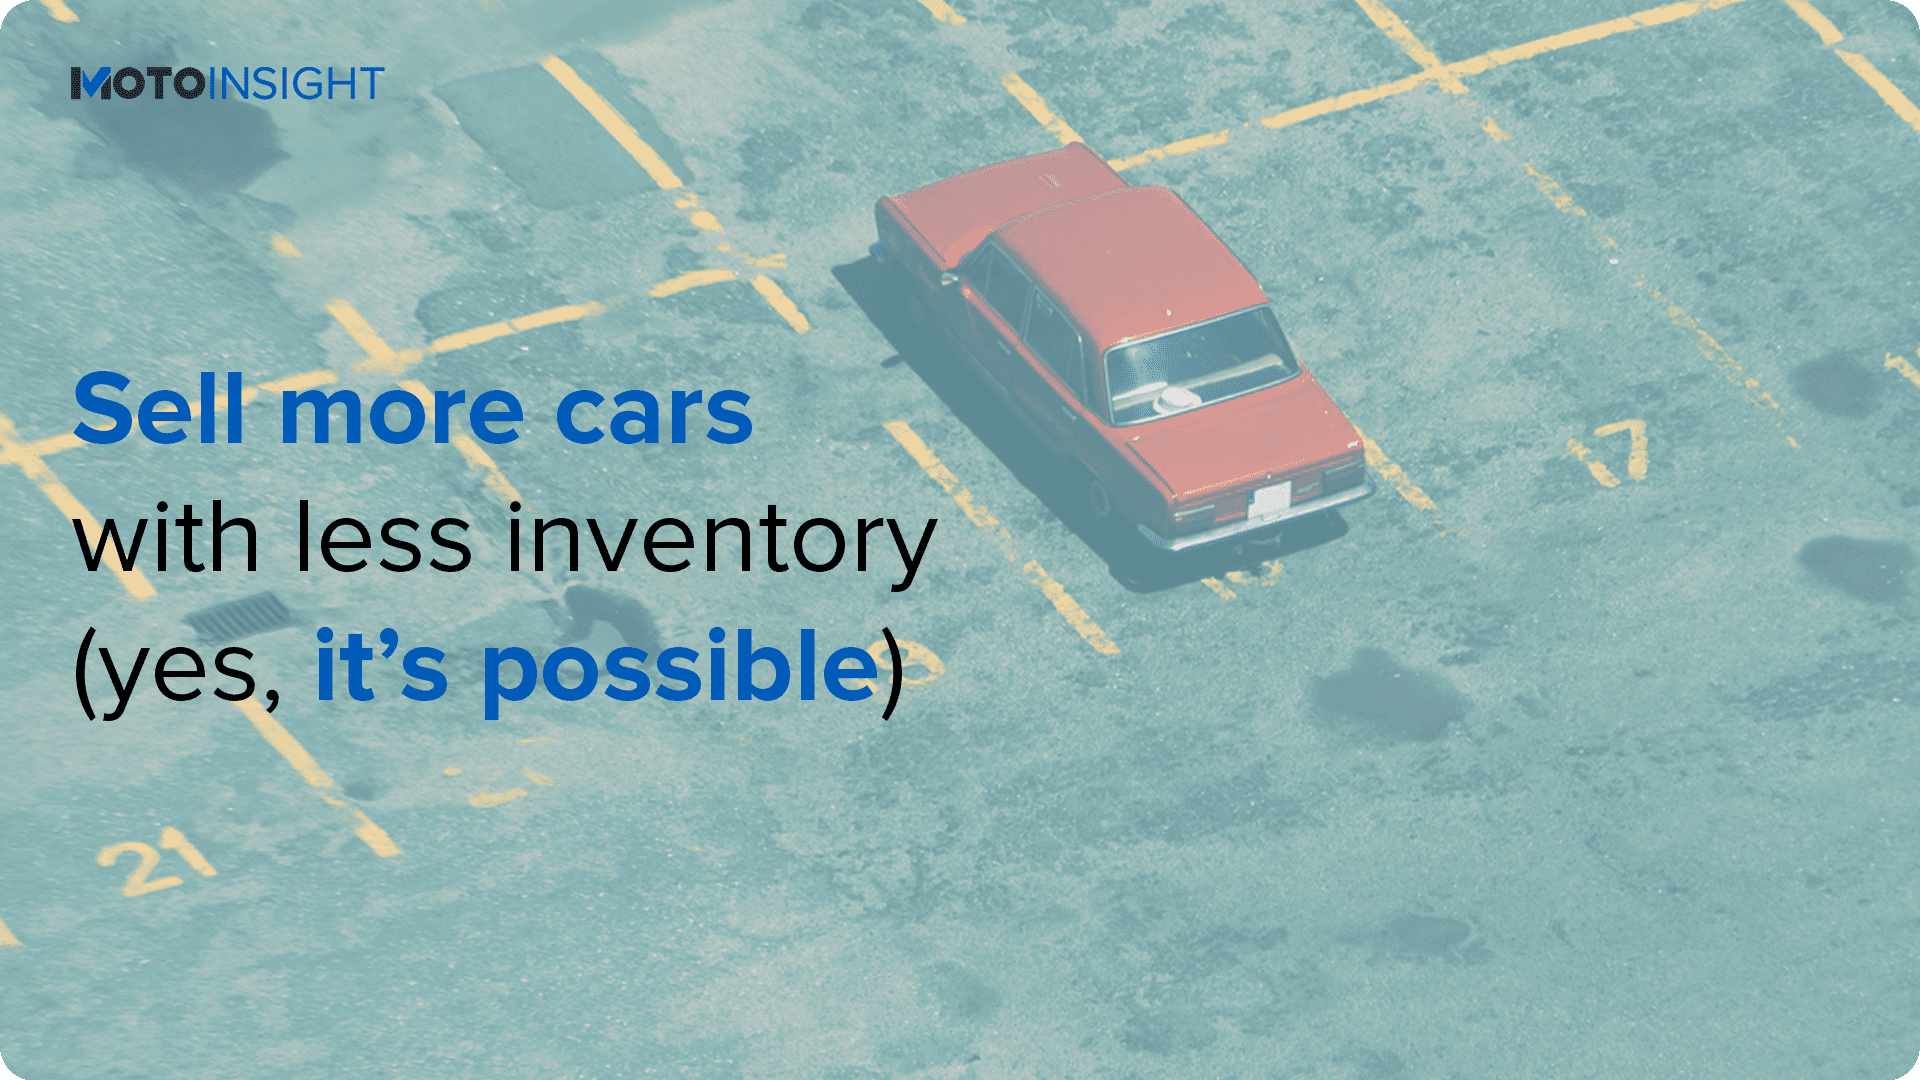 Sell more cars with less inventory (yes, it’s possible)